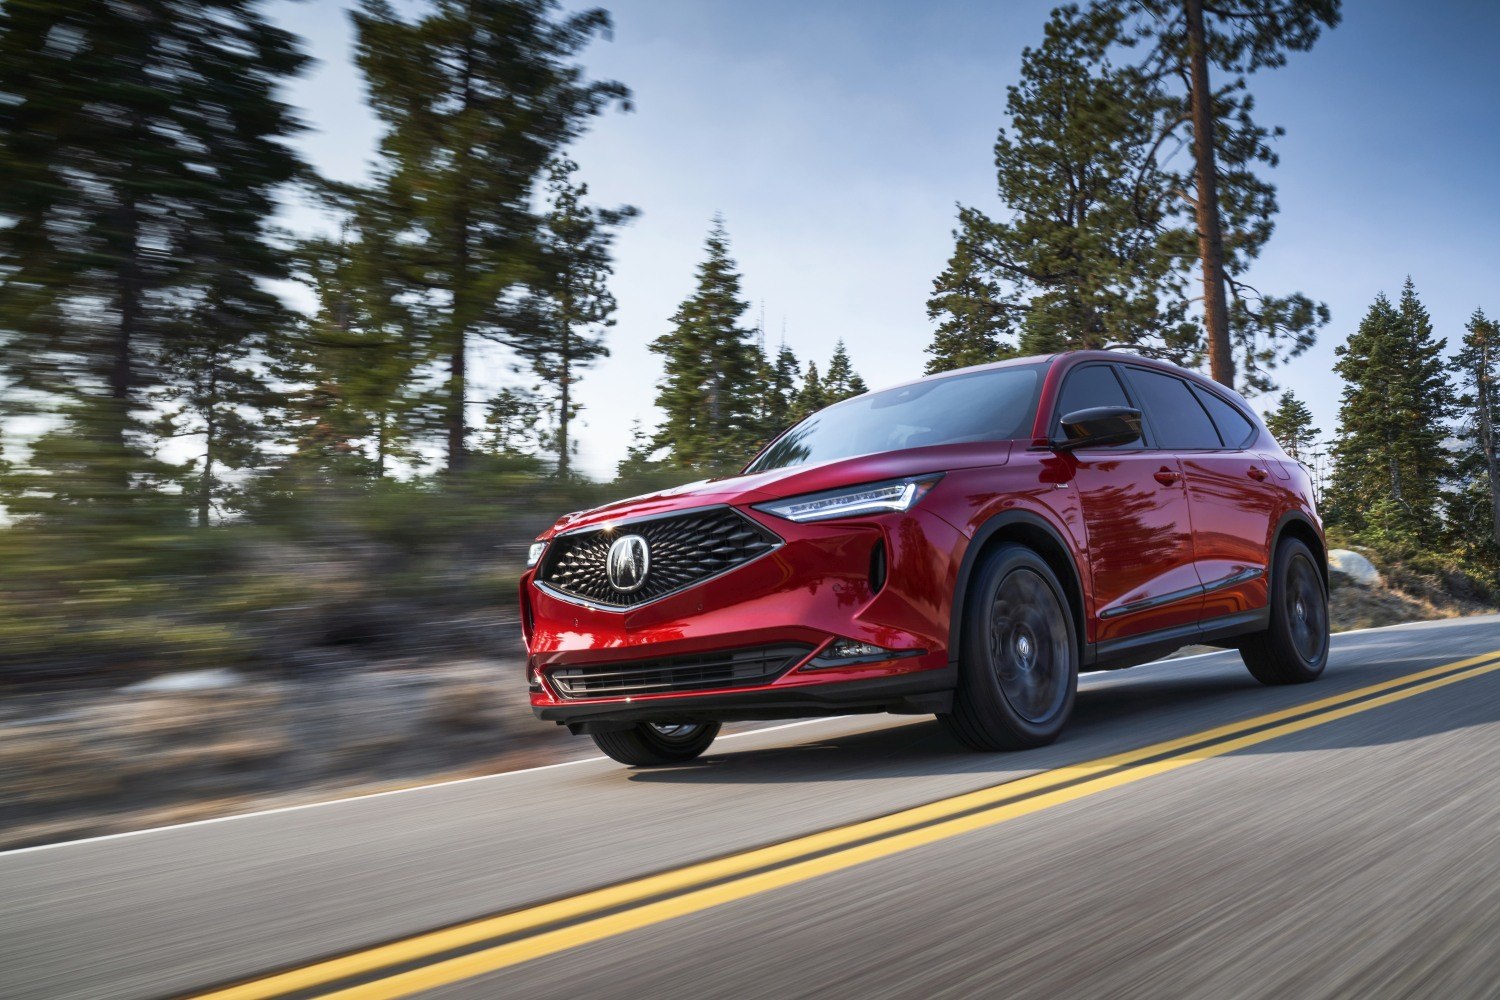 acura-mdx-technical-specifications-and-fuel-economy